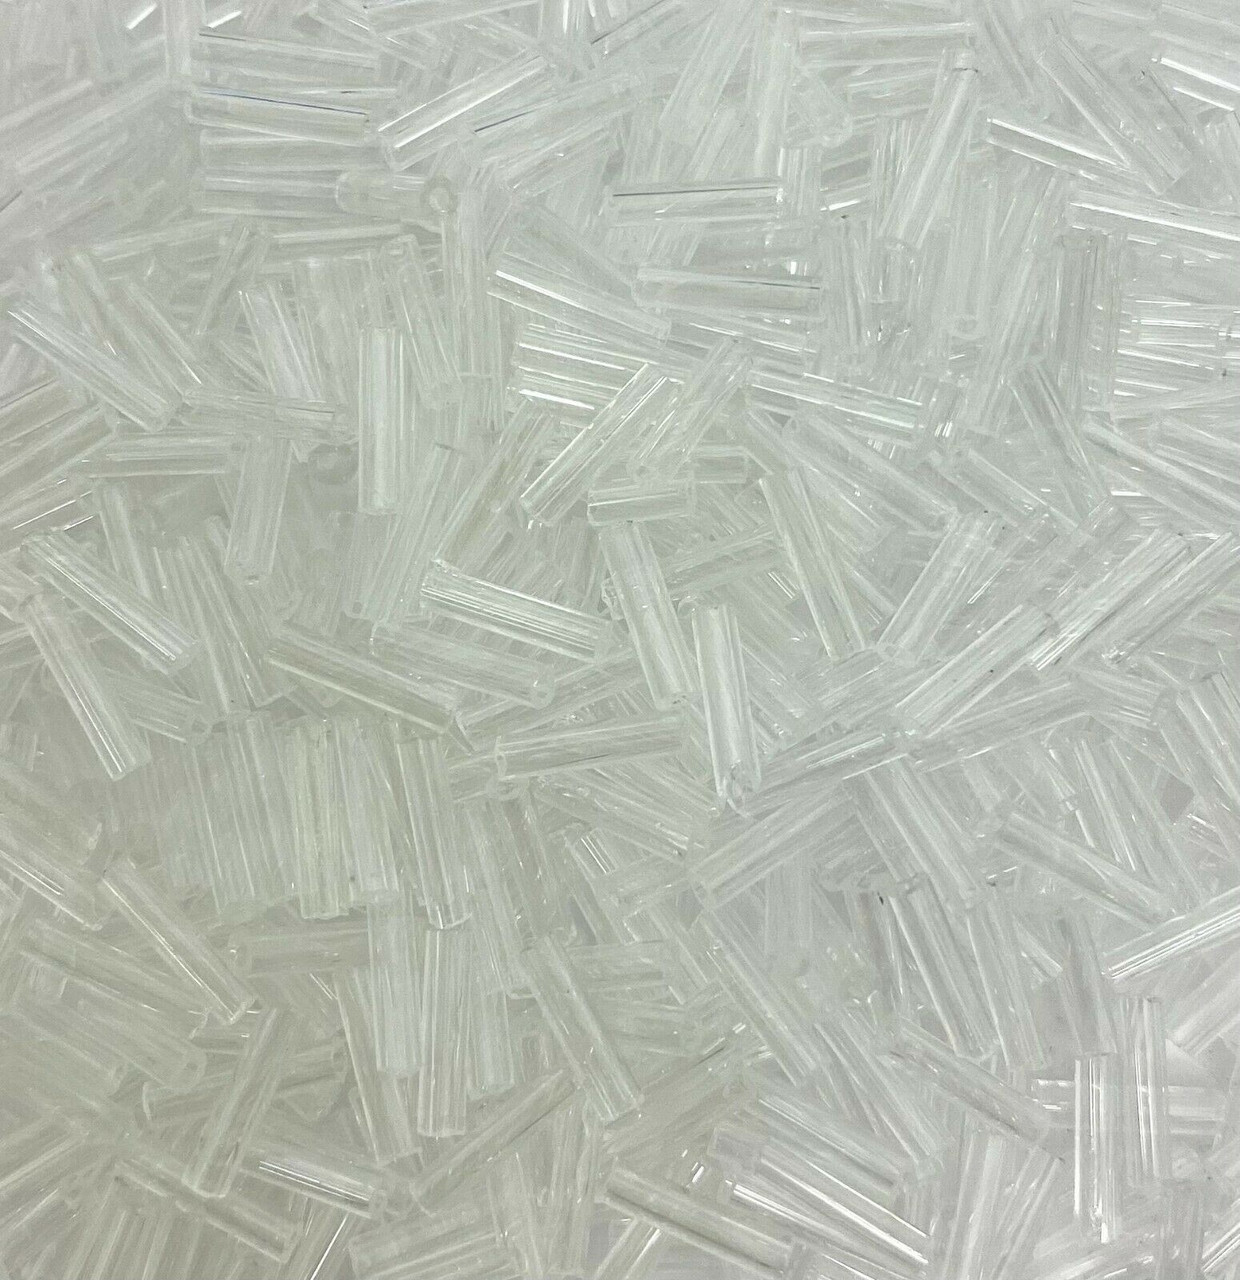 50g glass bugle beads - Clear Transparent - approx 6mm tubes, jewellery making